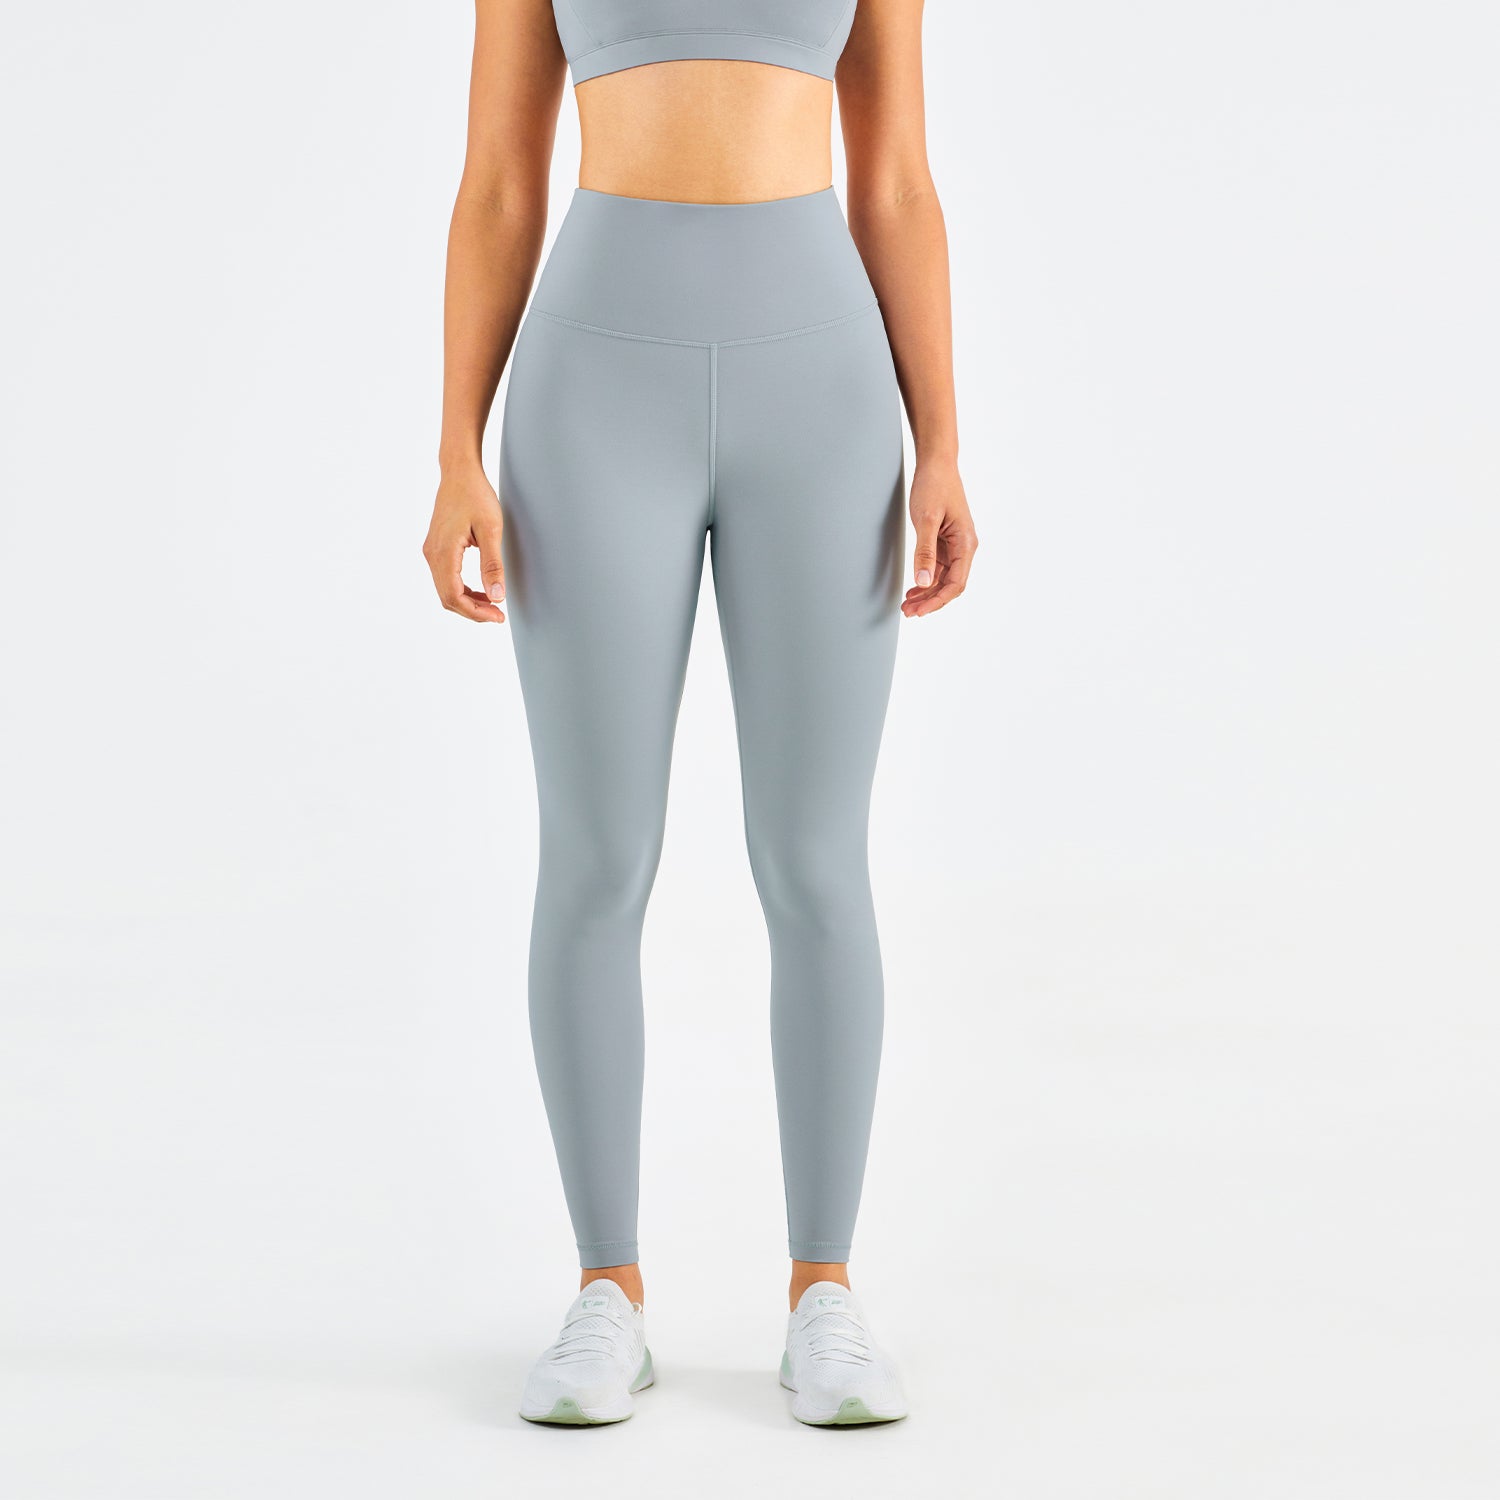 Women Super Soft Sports Gym Leggings High Waist Butt Lift Yoga Pants. This super comfortable legging is made from nylon and spandex breathable materials that are durable, quick-dry and have great stretchable abilities giving you a comfortable and flexible feel. Its suitable for jogging, yoga, gym and is comfortable for leisure wear.